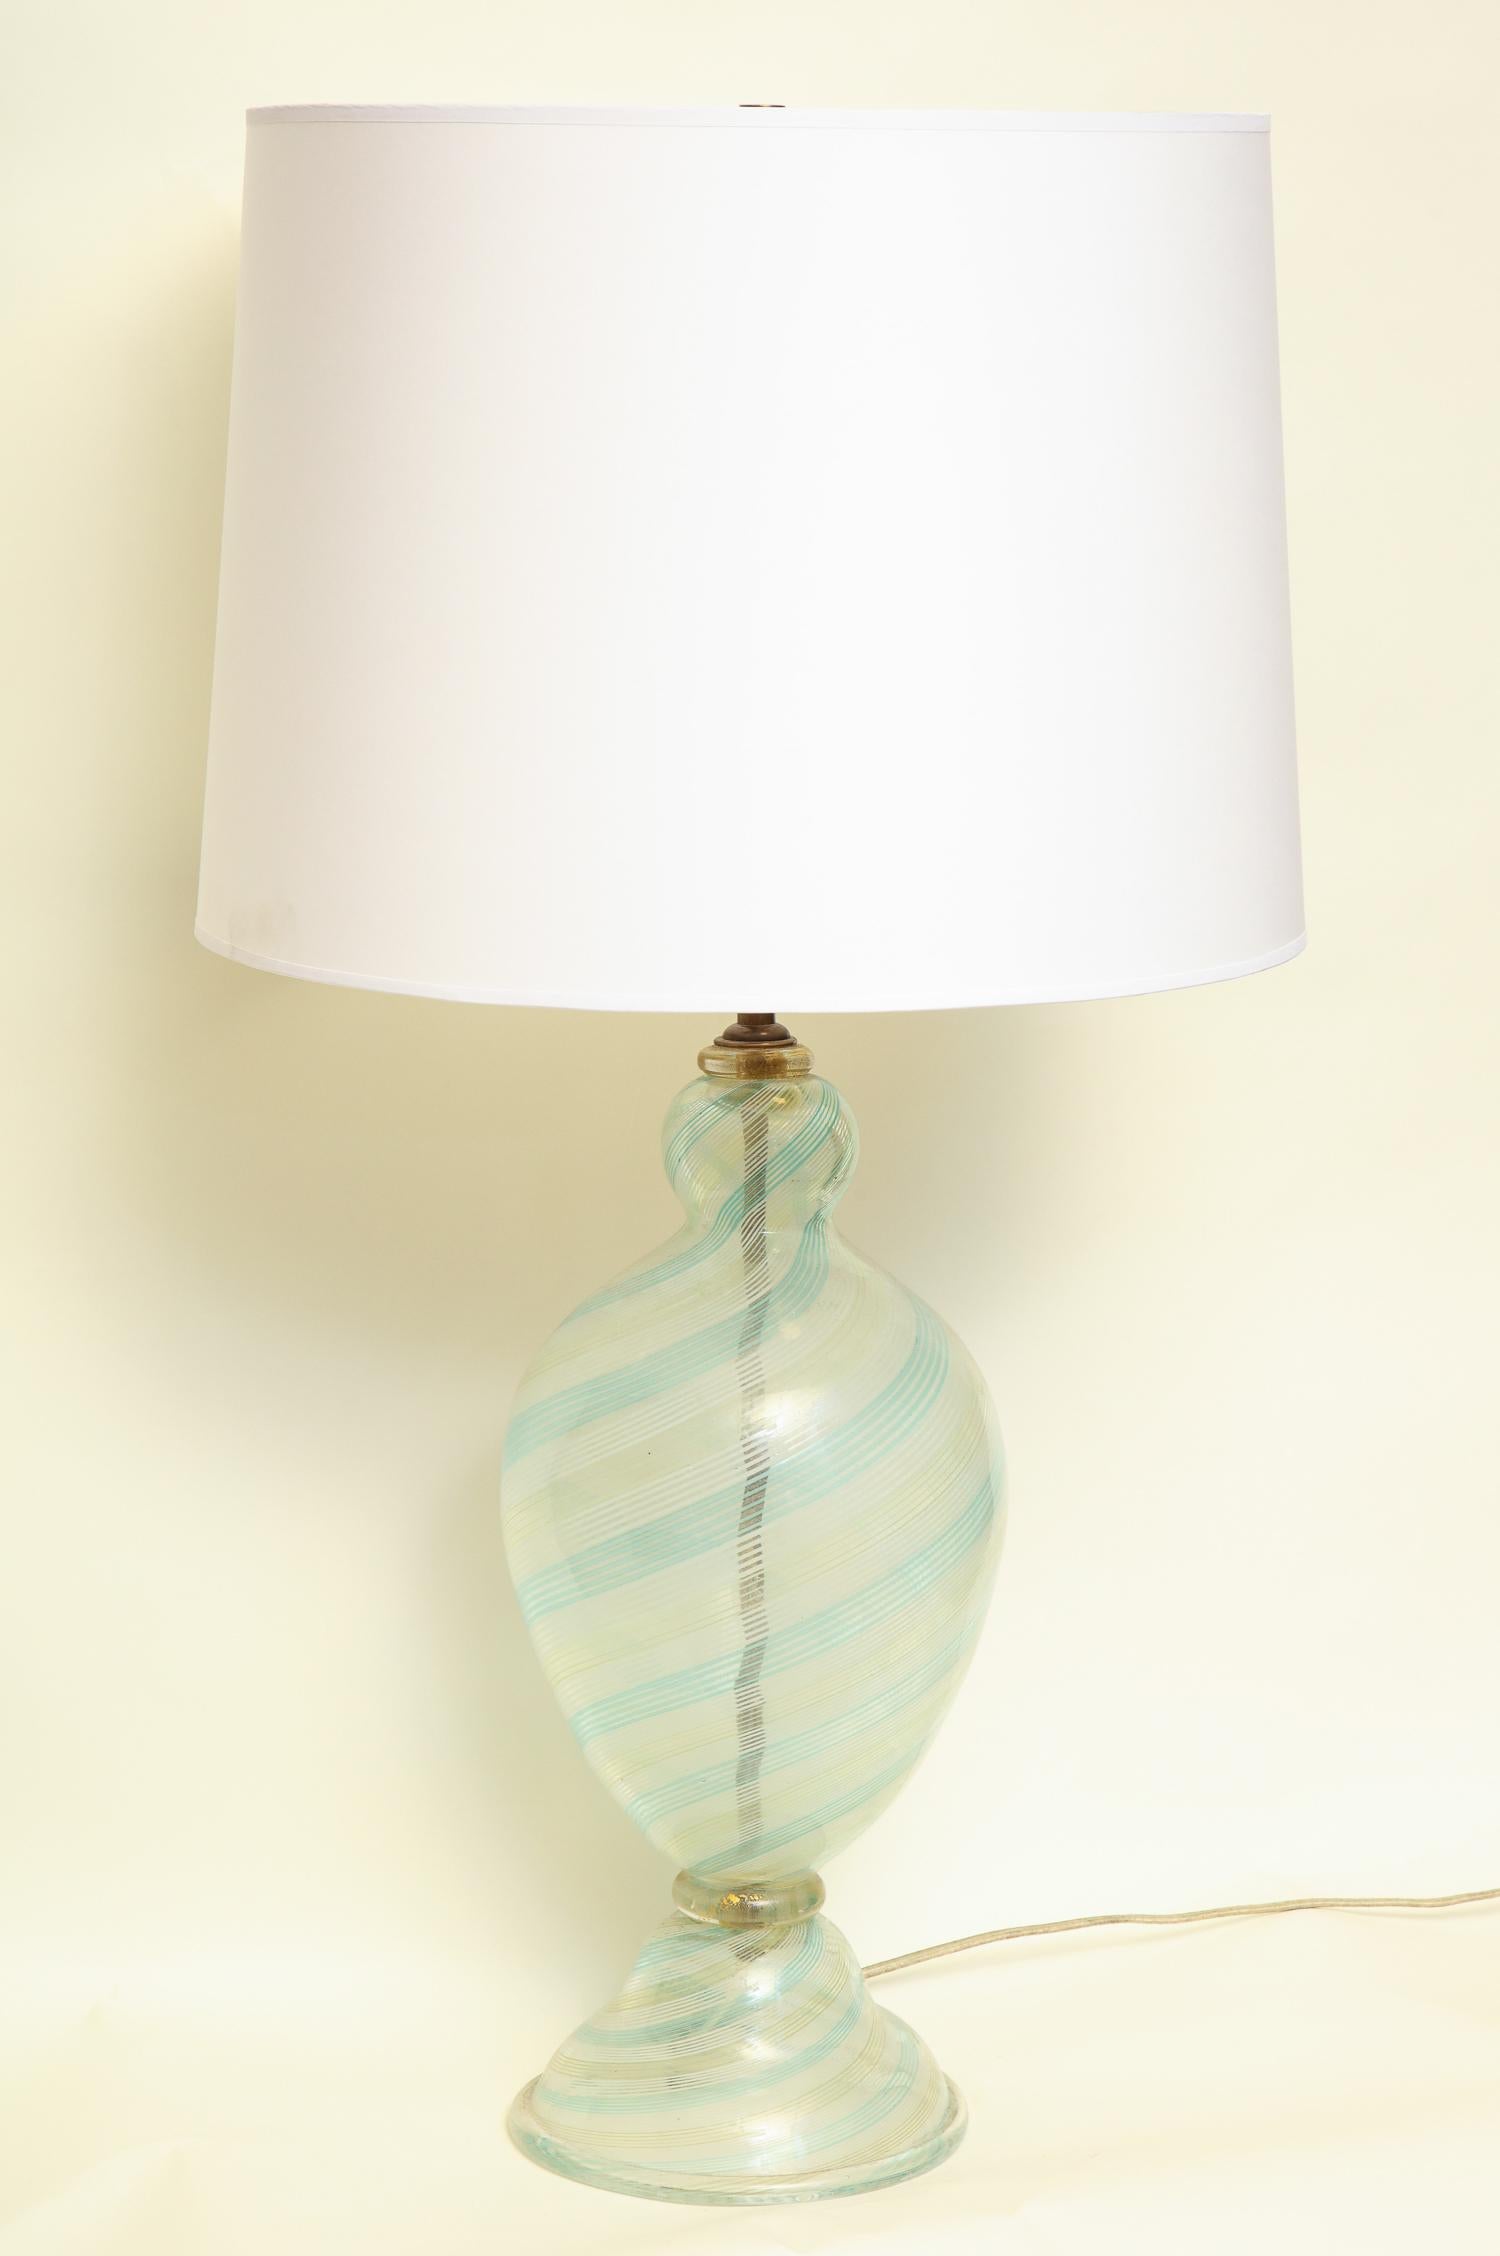 Italian Fratelli Toso Table Lamp Murano Art Glass Mid-Century Modern Italy, 1940s For Sale